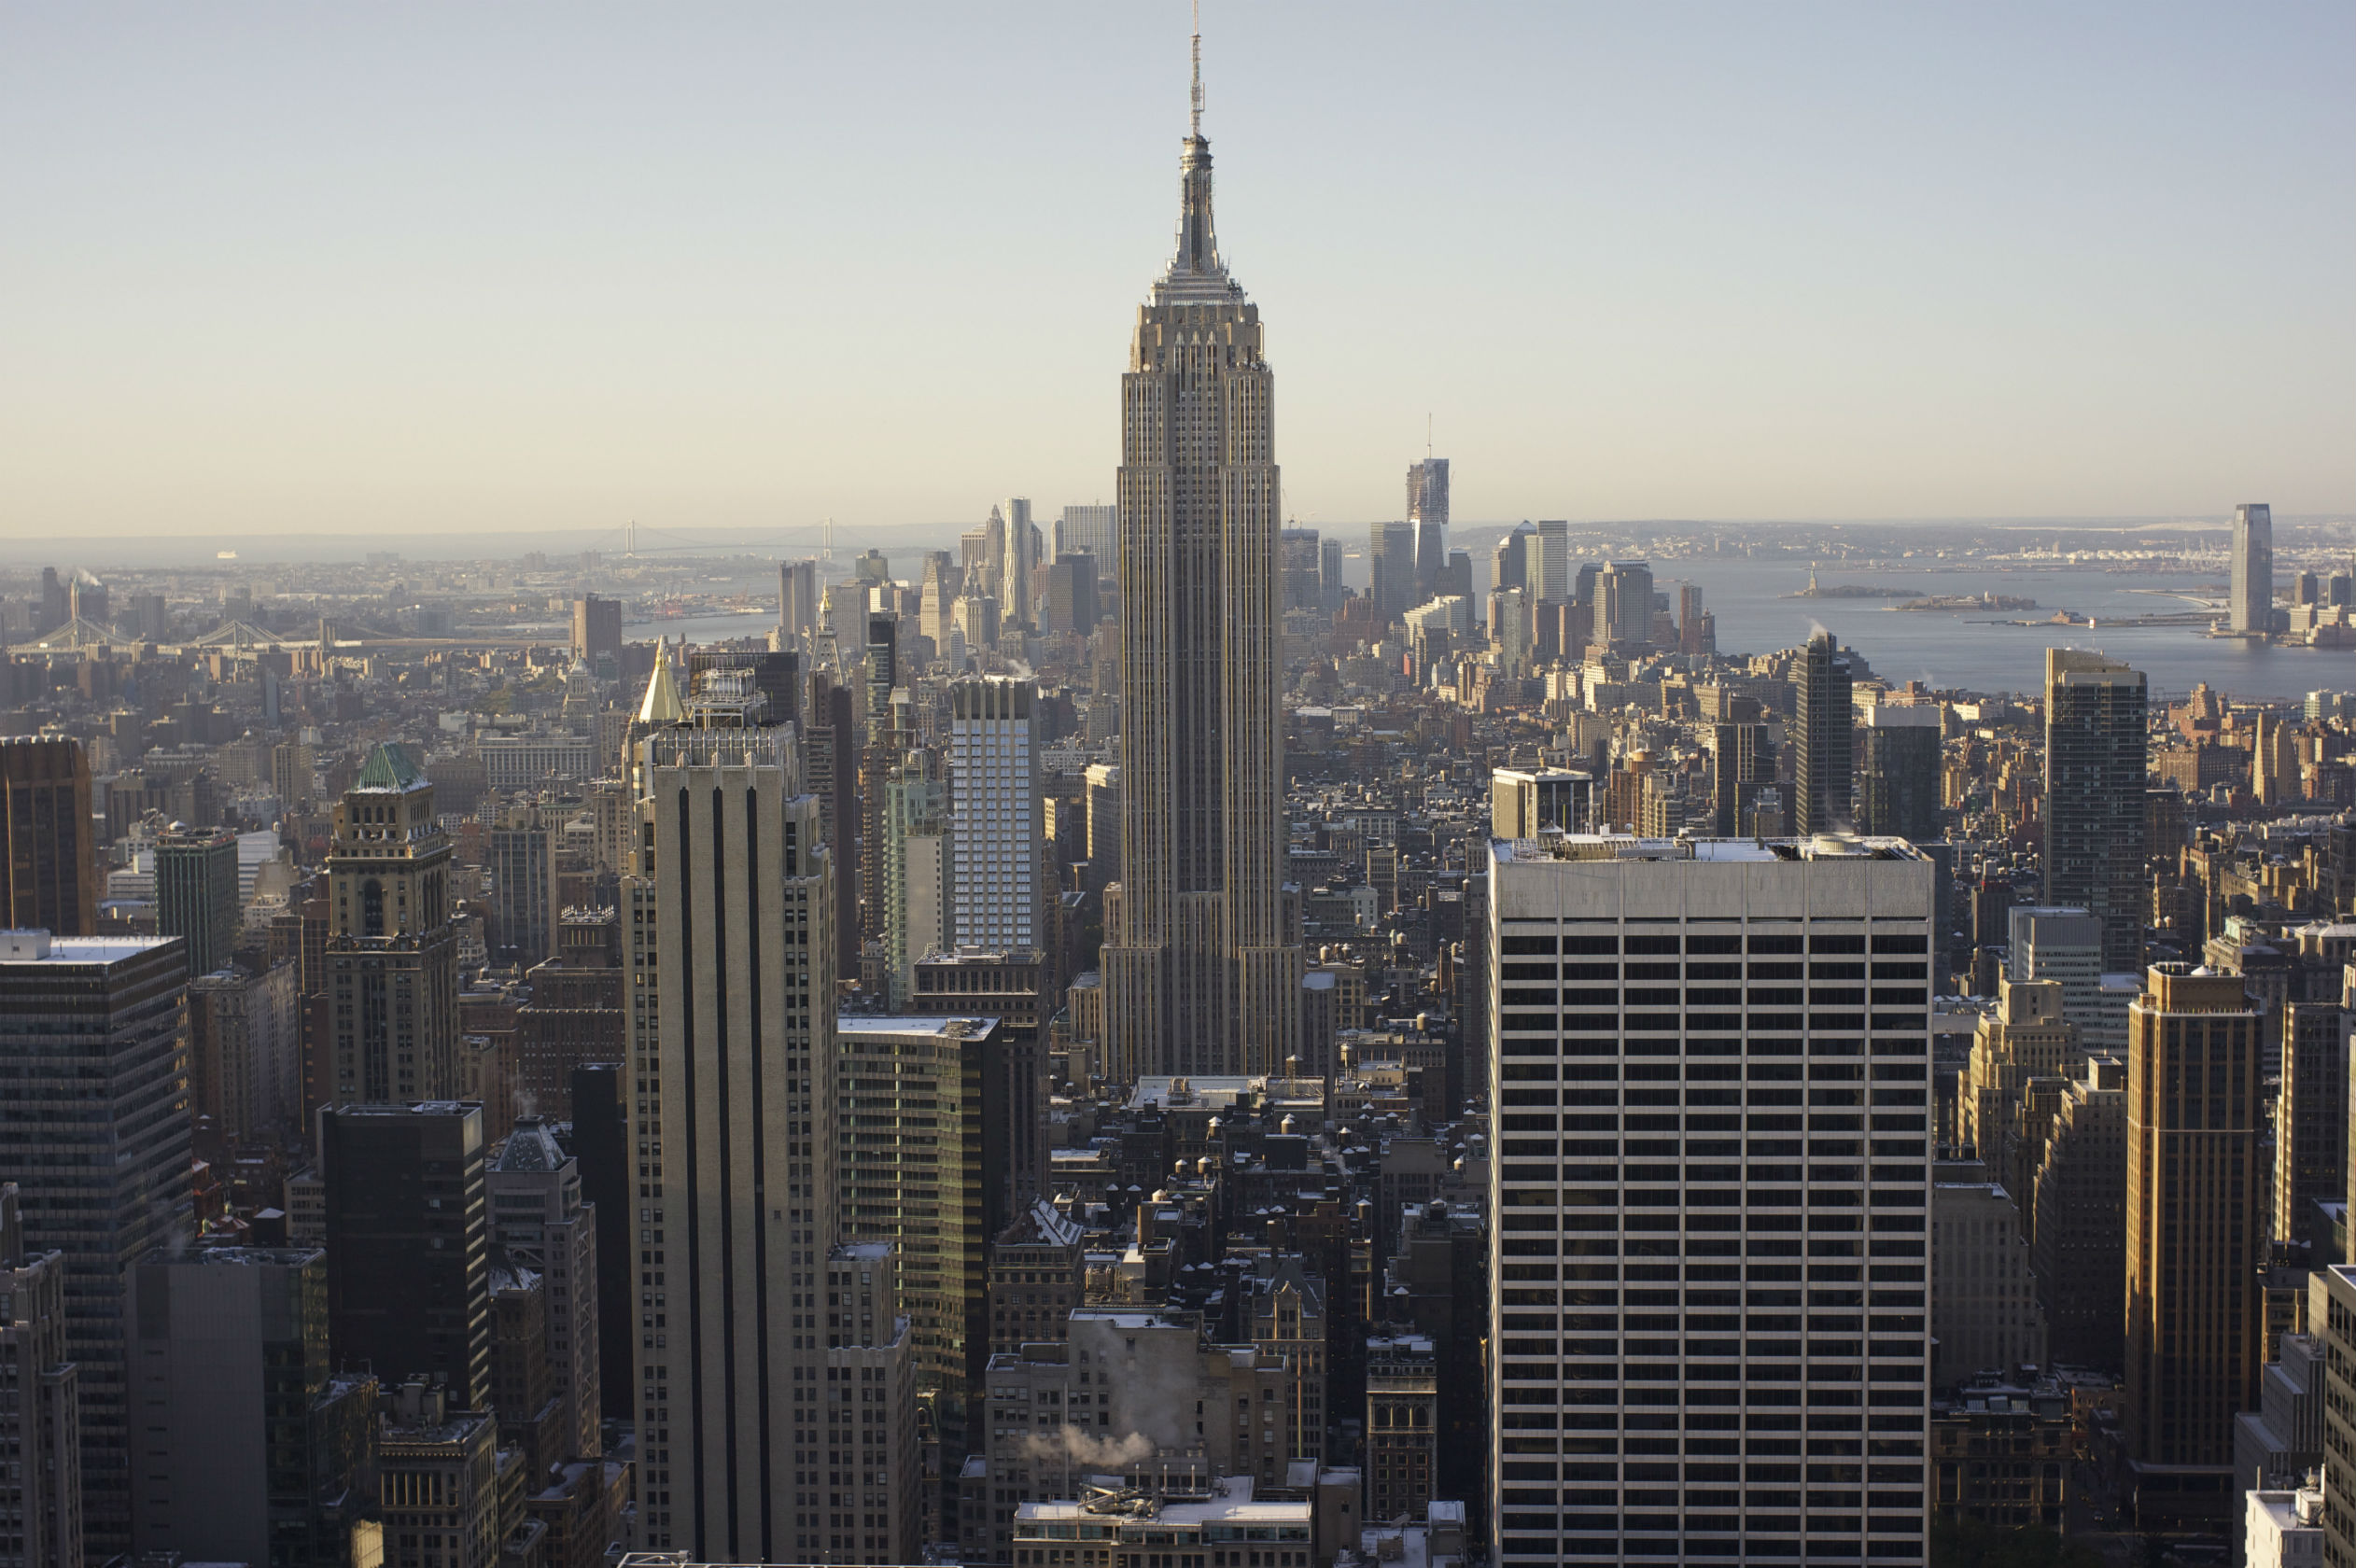 man made, empire state building, manhattan, new york, monuments phone background